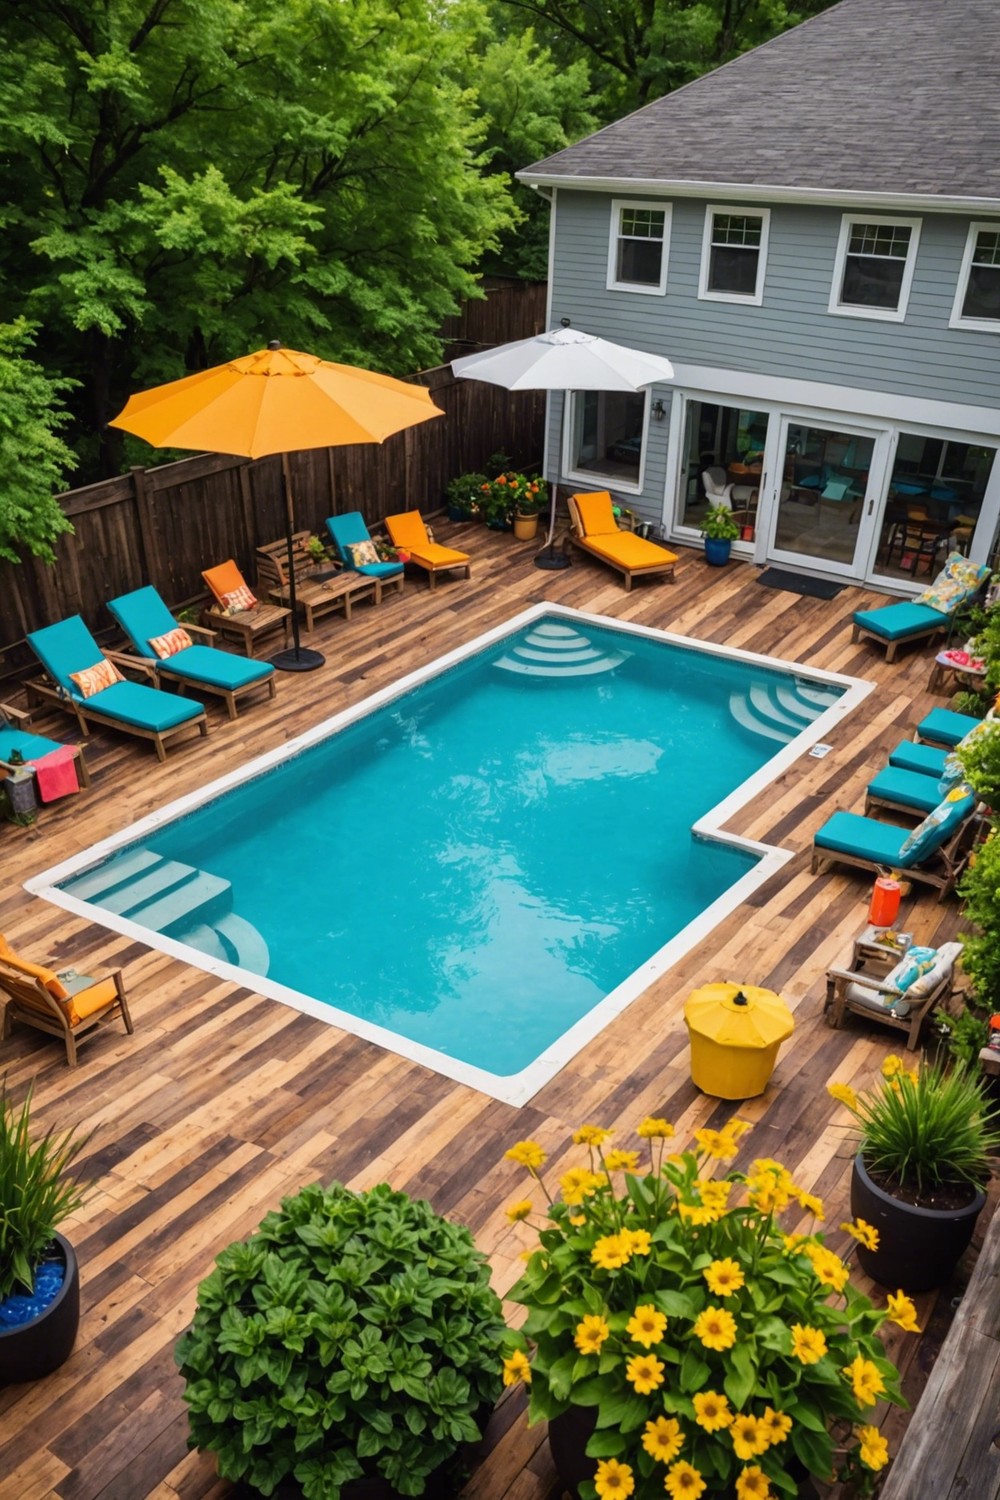 Pallet Pool Decks with Built-in Coolers